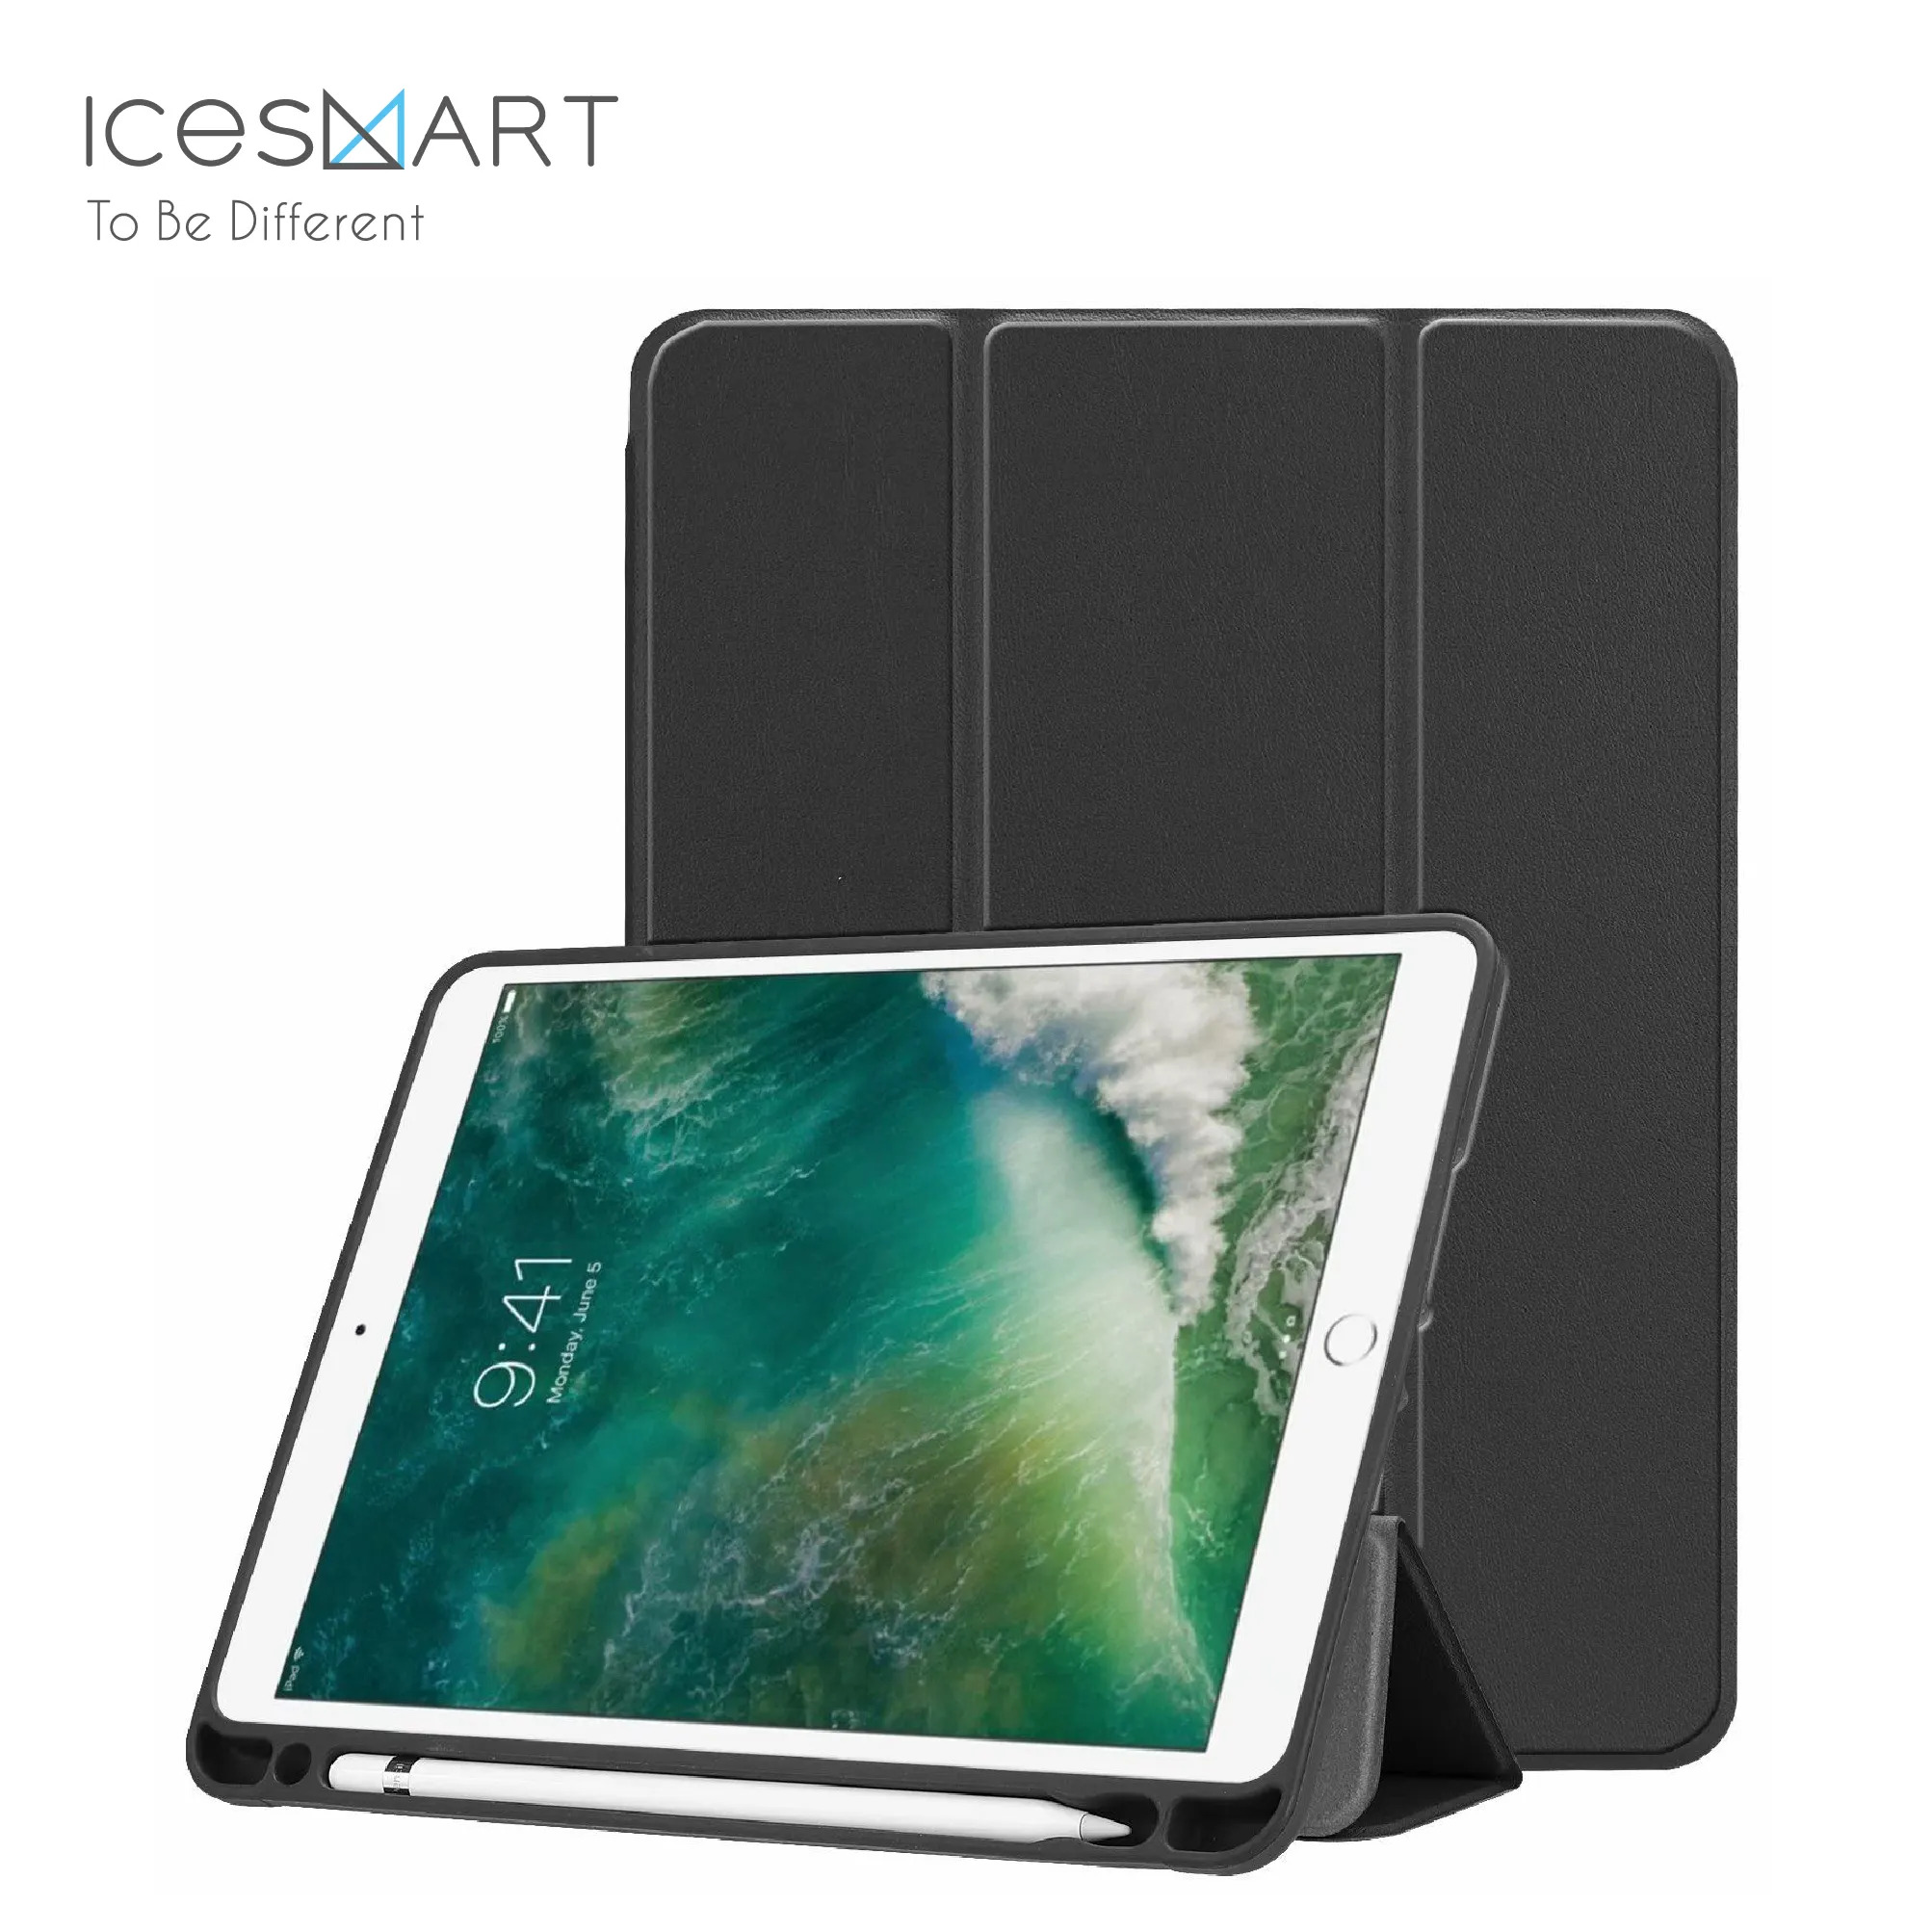 Case for iPad 9.7 2017 /2018 PU Leather Smart flip protective Cover Case for iPad 9.7 inch case